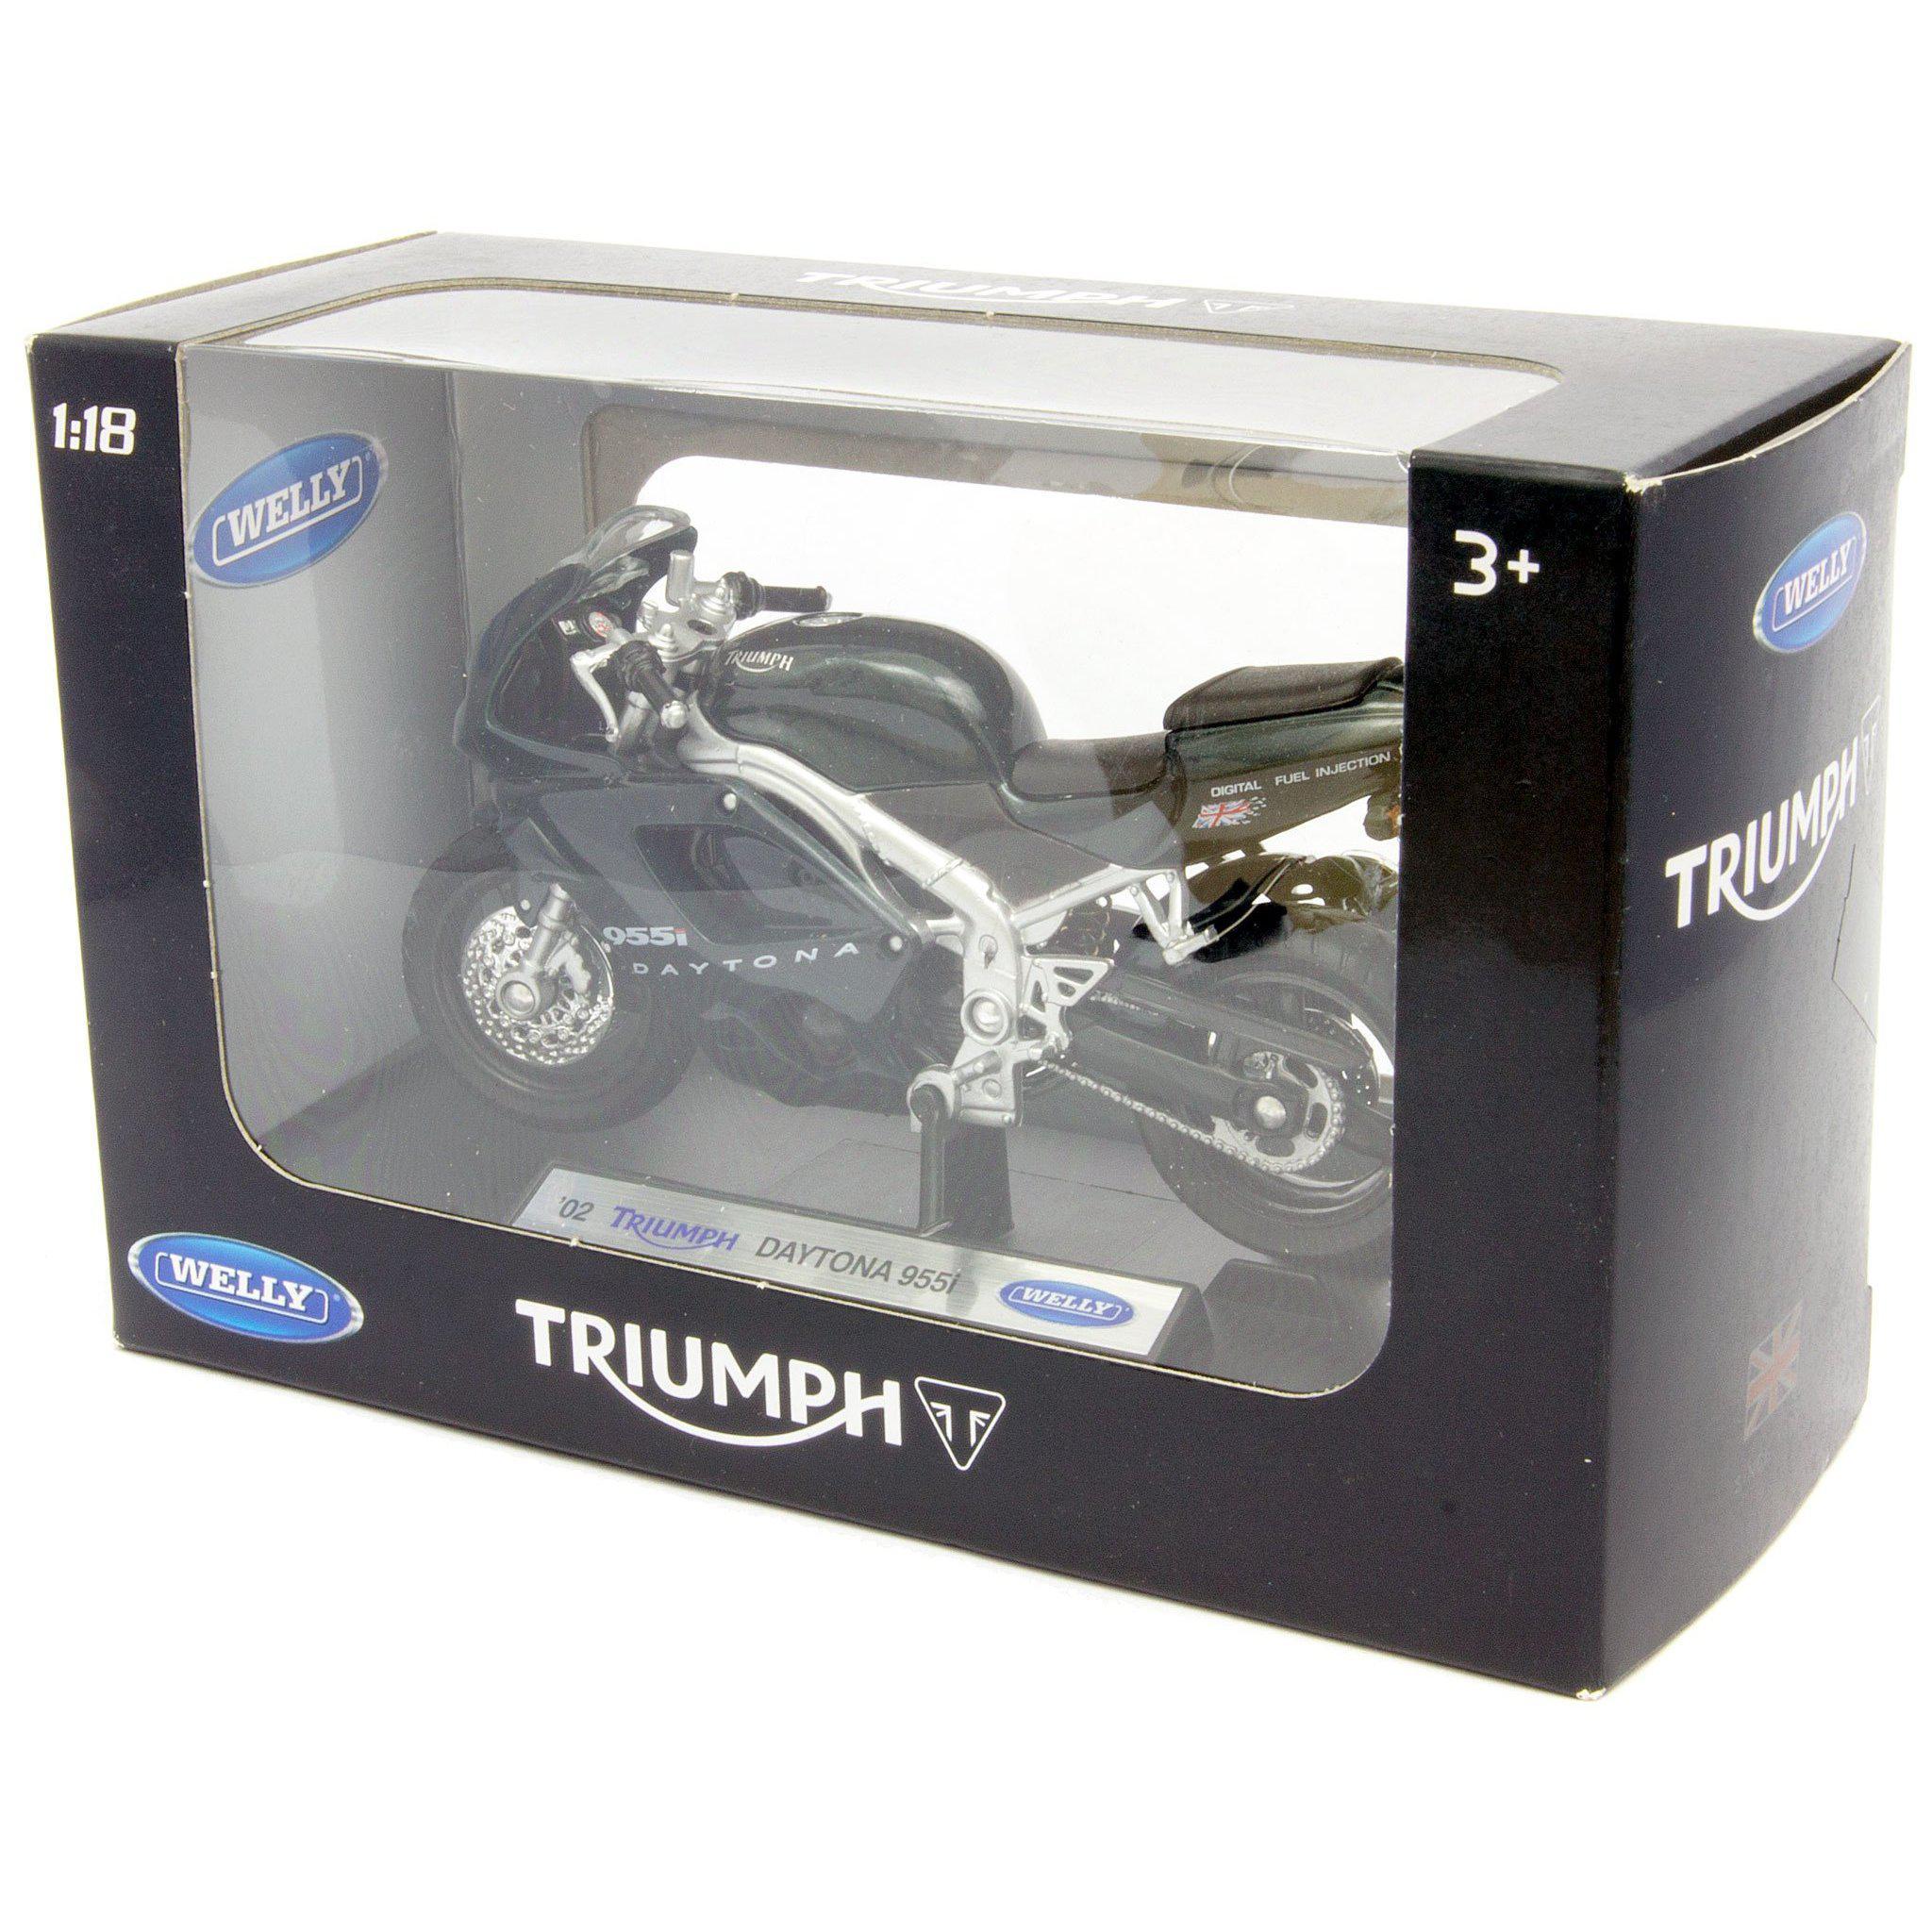 Triumph Daytona 955i Diecast Model Motorcycle 2002 - 1:18 Scale-Welly-Diecast Model Centre